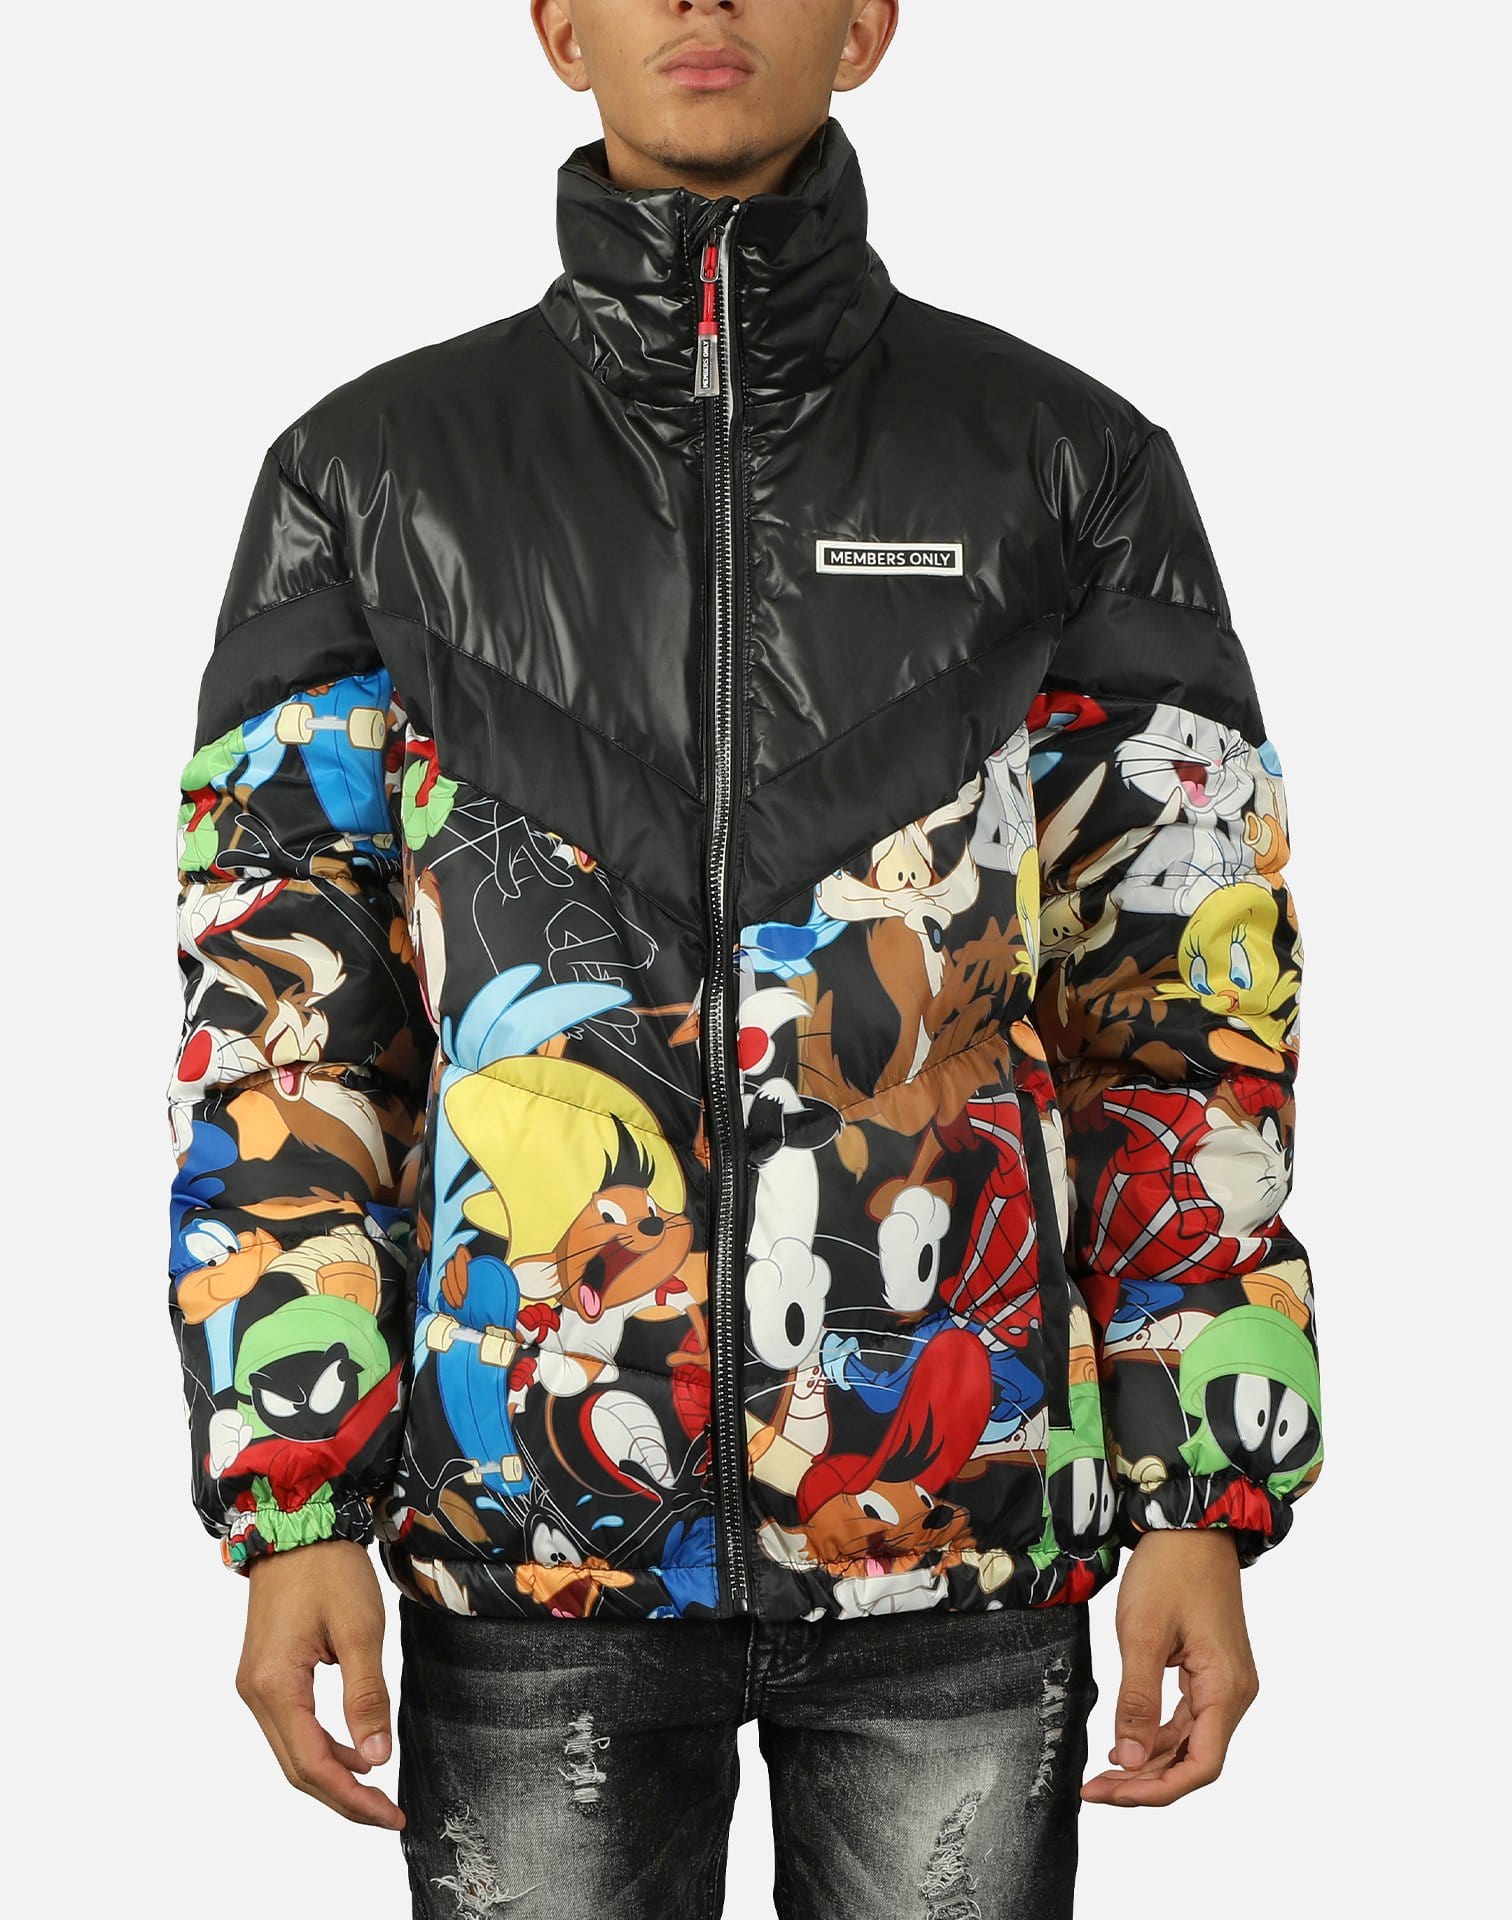 Members Only LOONEY TUNES CHEVY BLOCKING JACKET